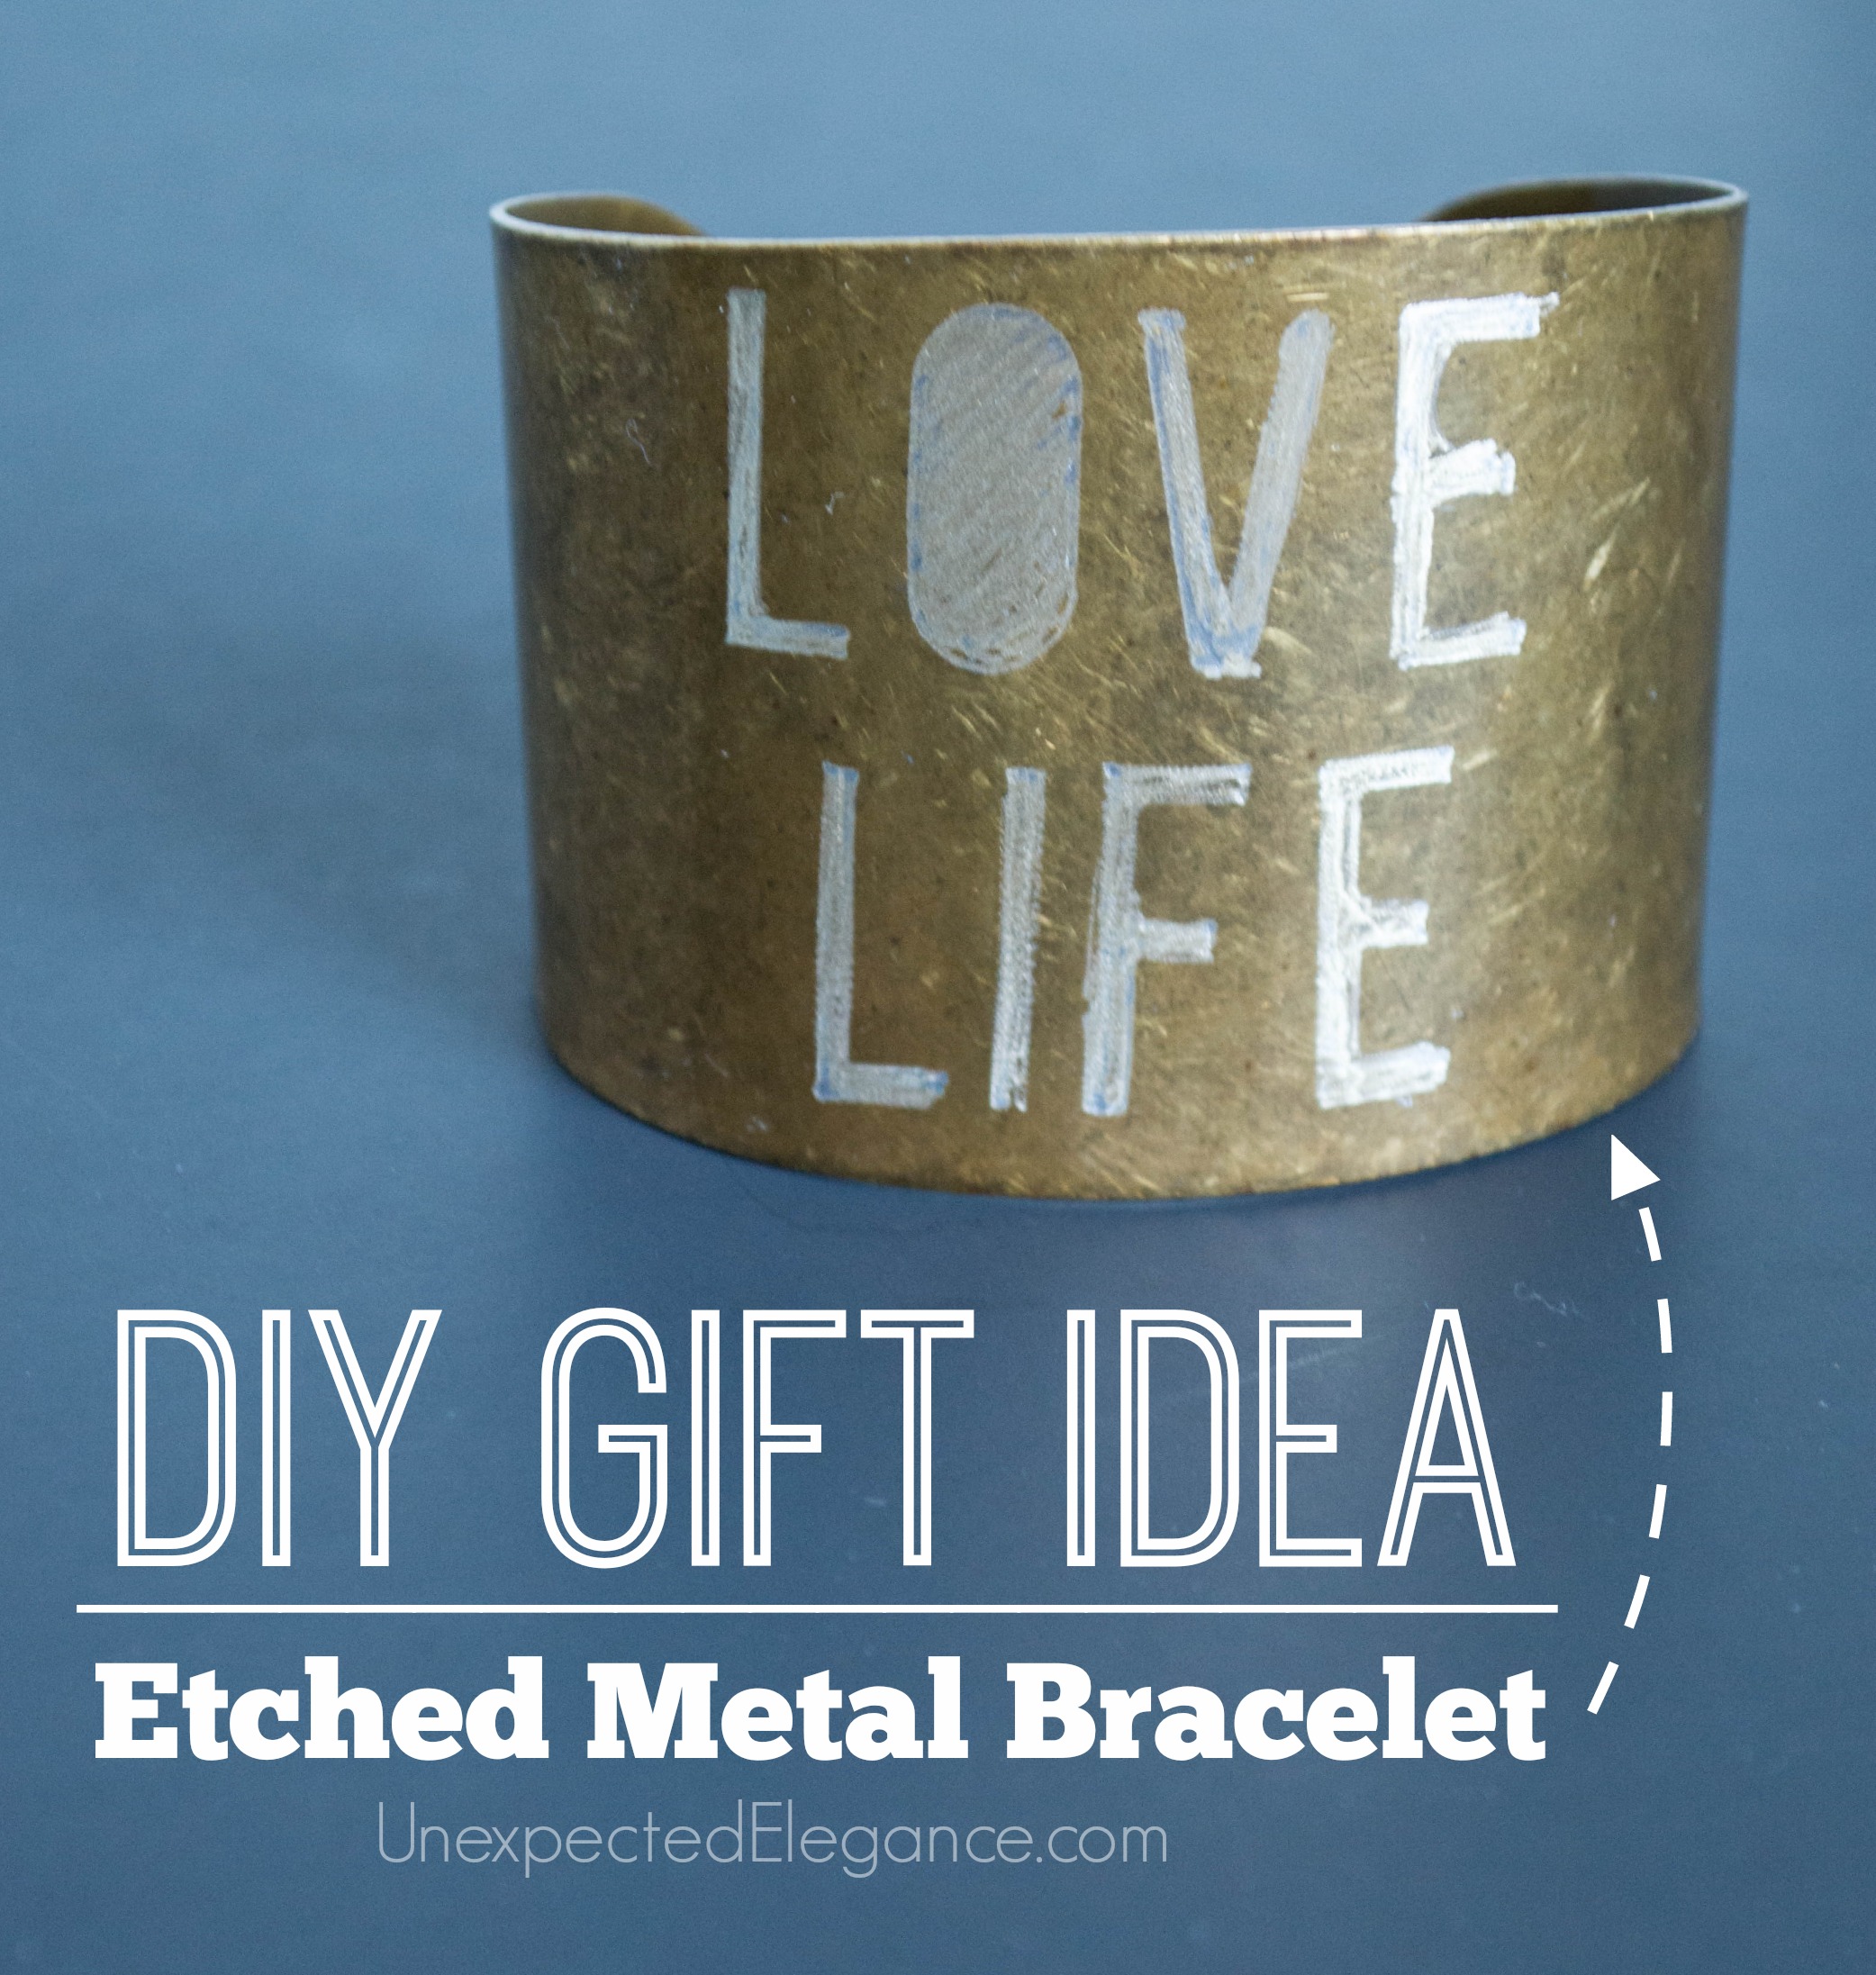 Need a great handmade and inexpensive gift idea? Check out this 10 Minute DIY Engraved Metal Bracelet tutorial. Great for a personalized gift.